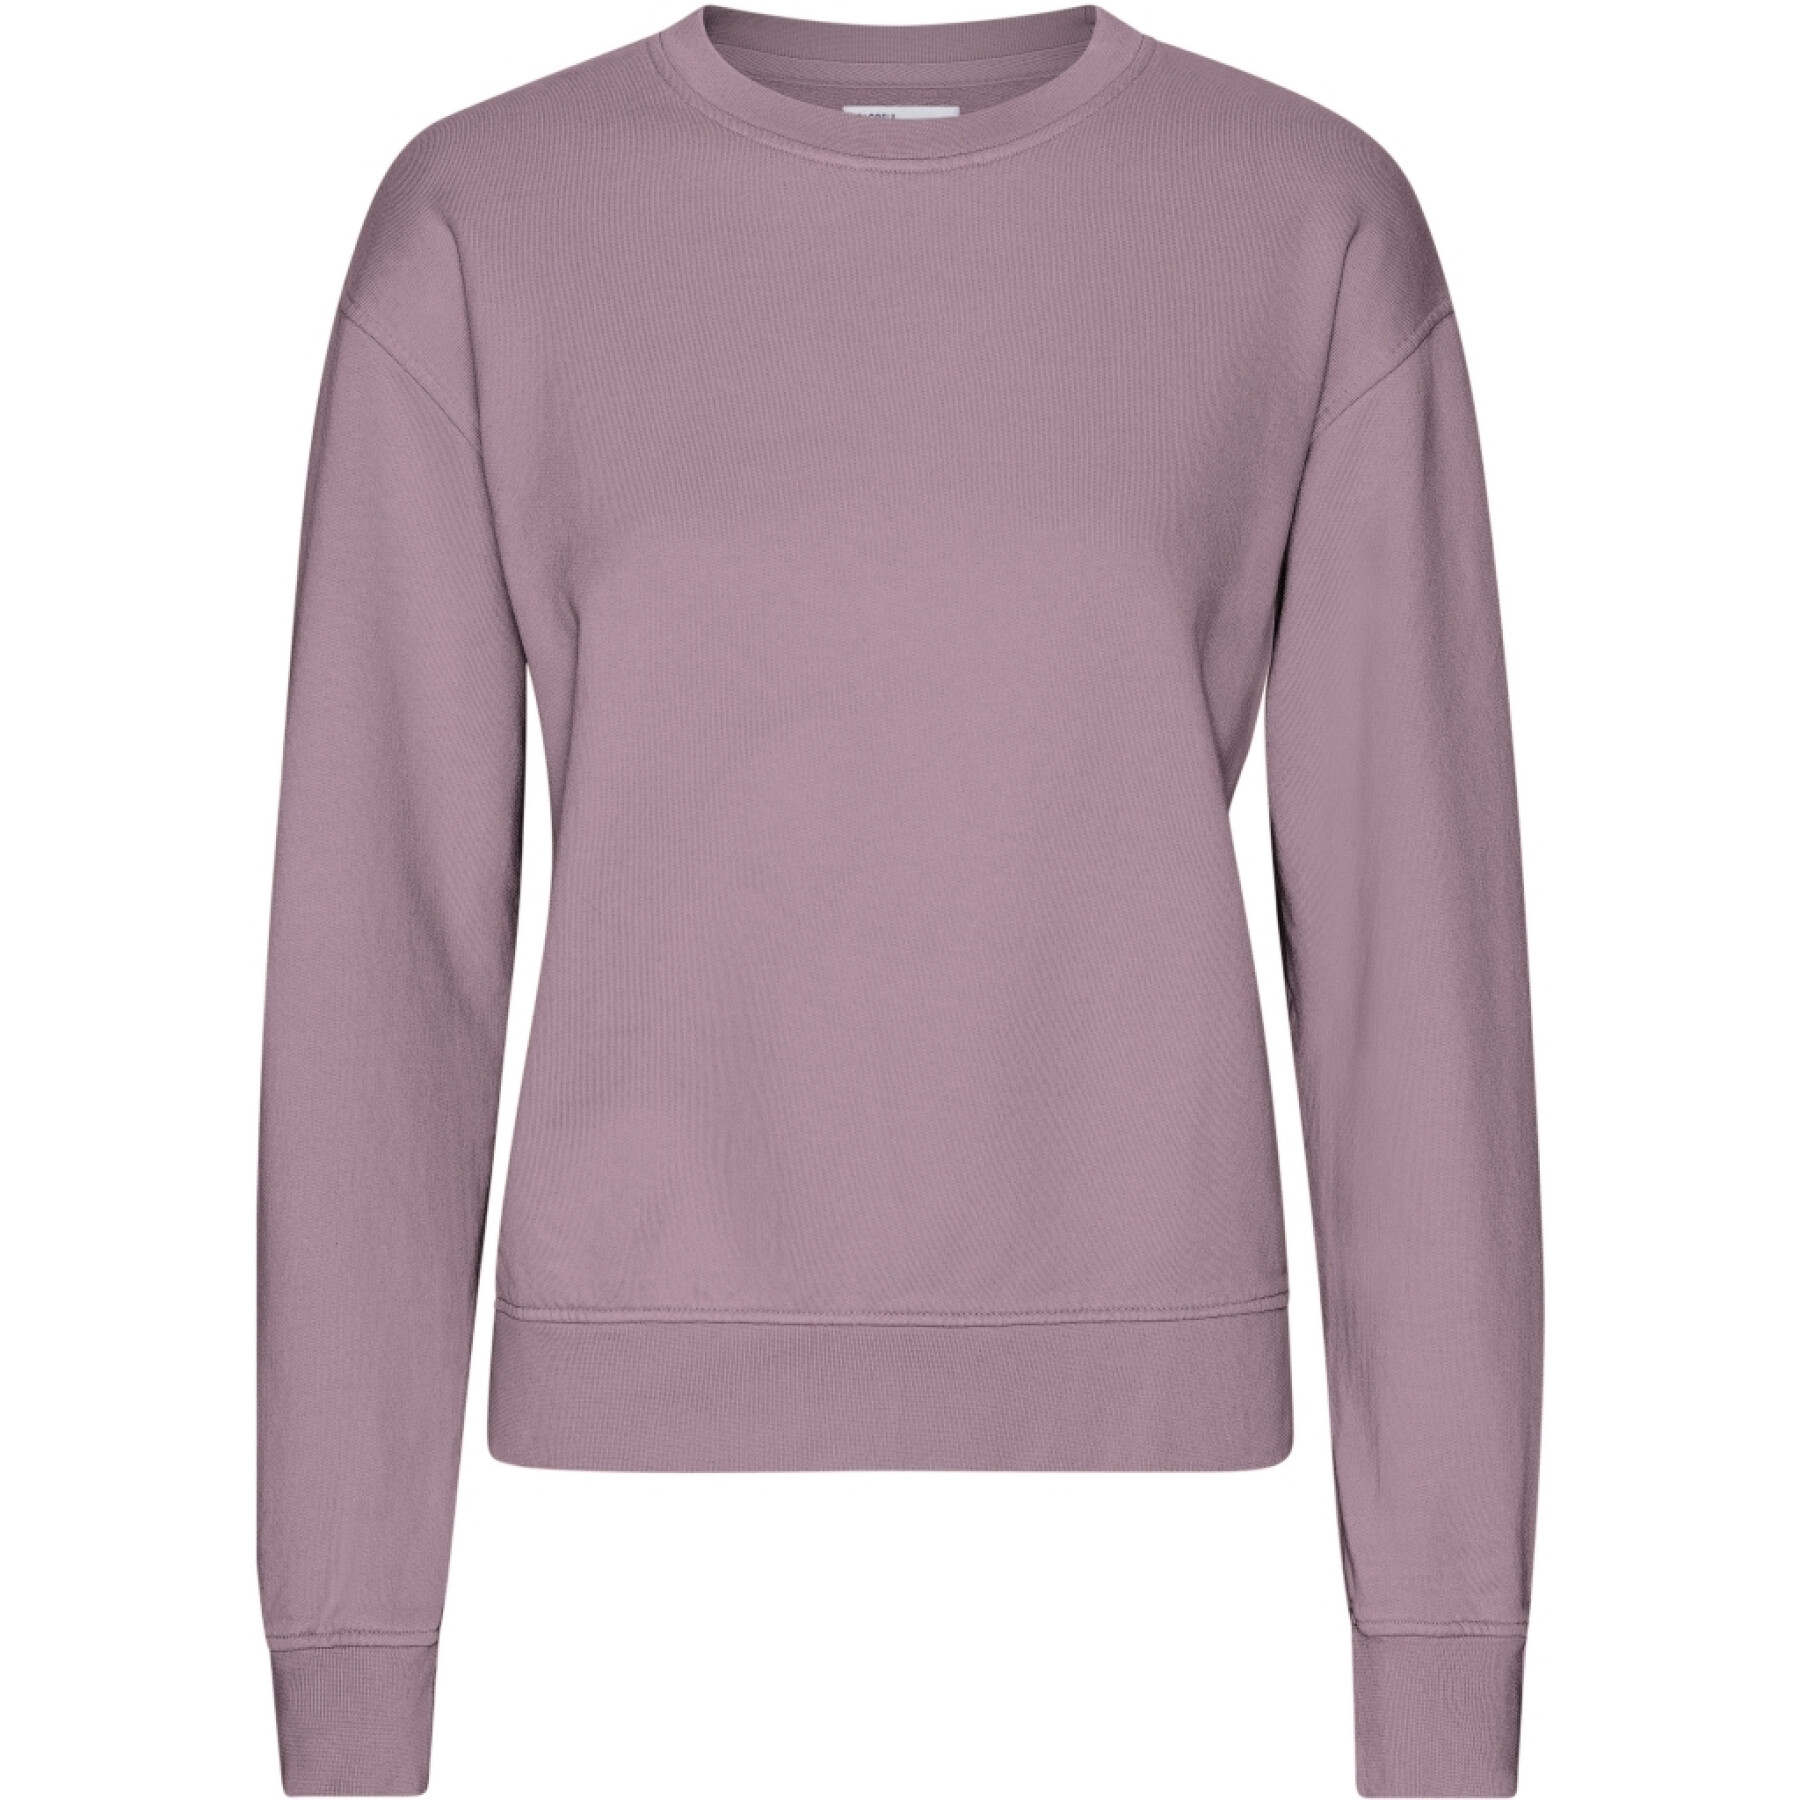 Sweatshirt col rond femme Colorful Standard Classic Organic Pearly Purple